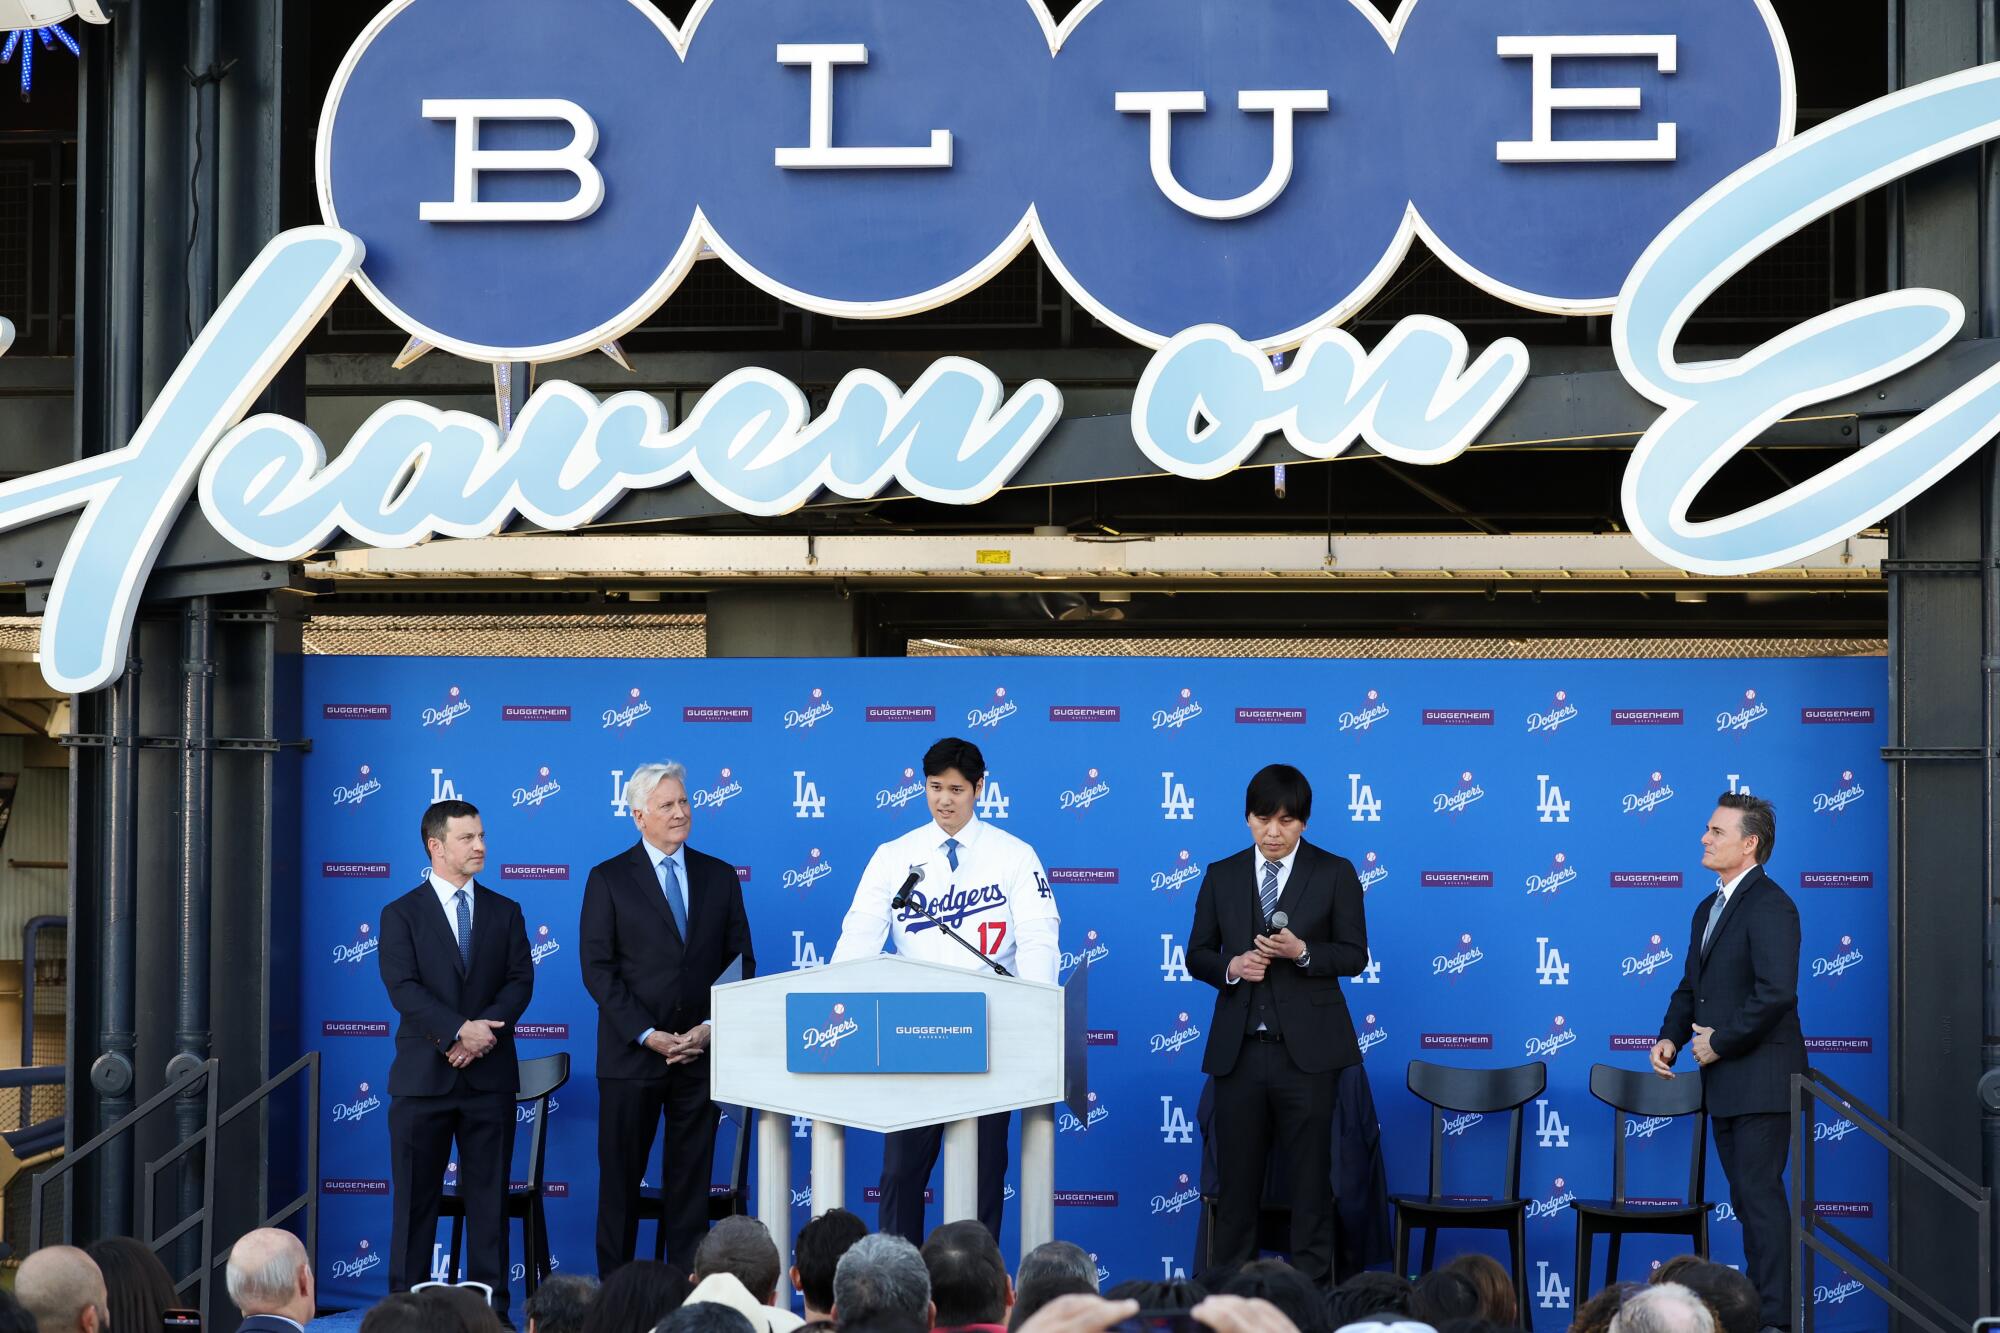 Shohei Ohtani, center, speaks on the stage during his introductory news conference at Dodger Stadium on Dec. 14.